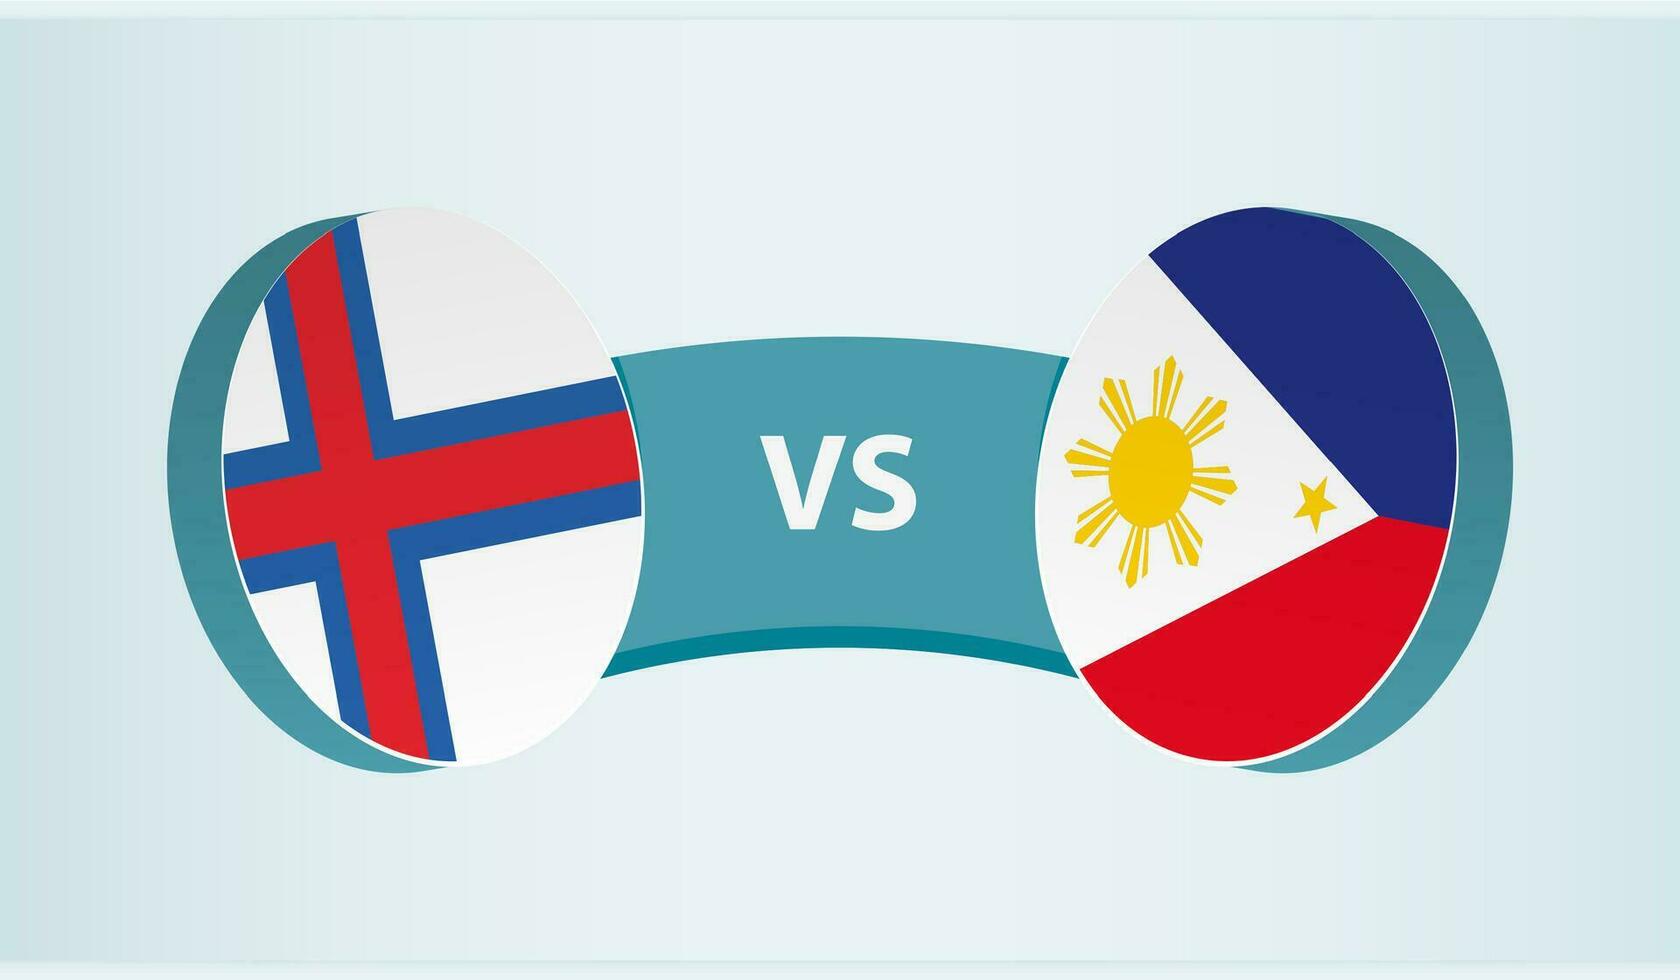 Faroe Islands versus Philippines, team sports competition concept. vector